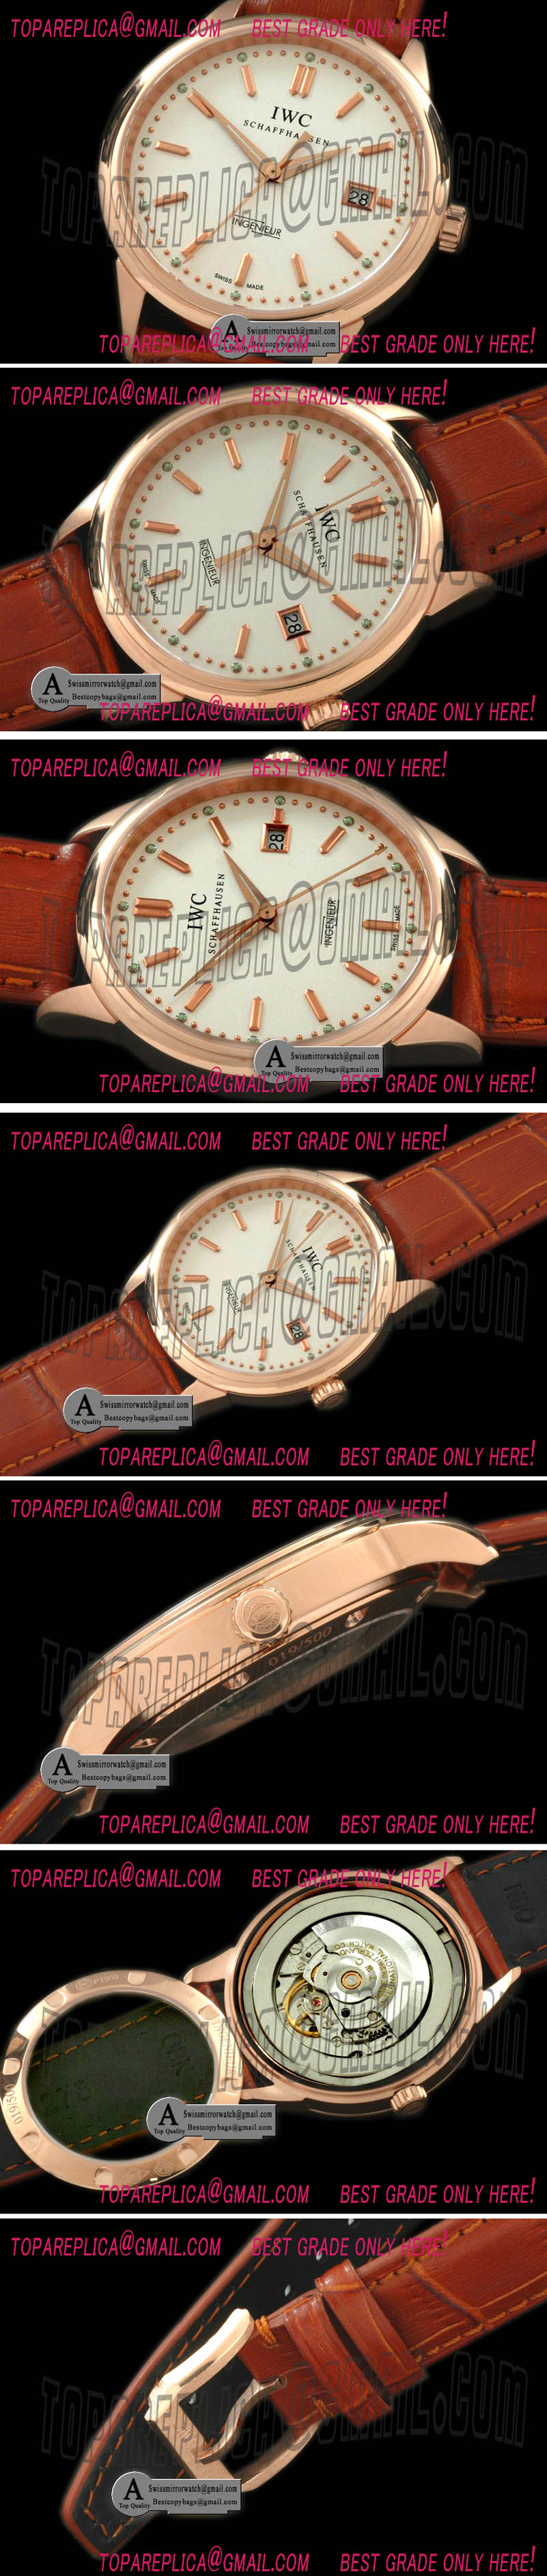 IWC Ingenuier Vintage Rose Gold Leather White A 2824 Replica Watches